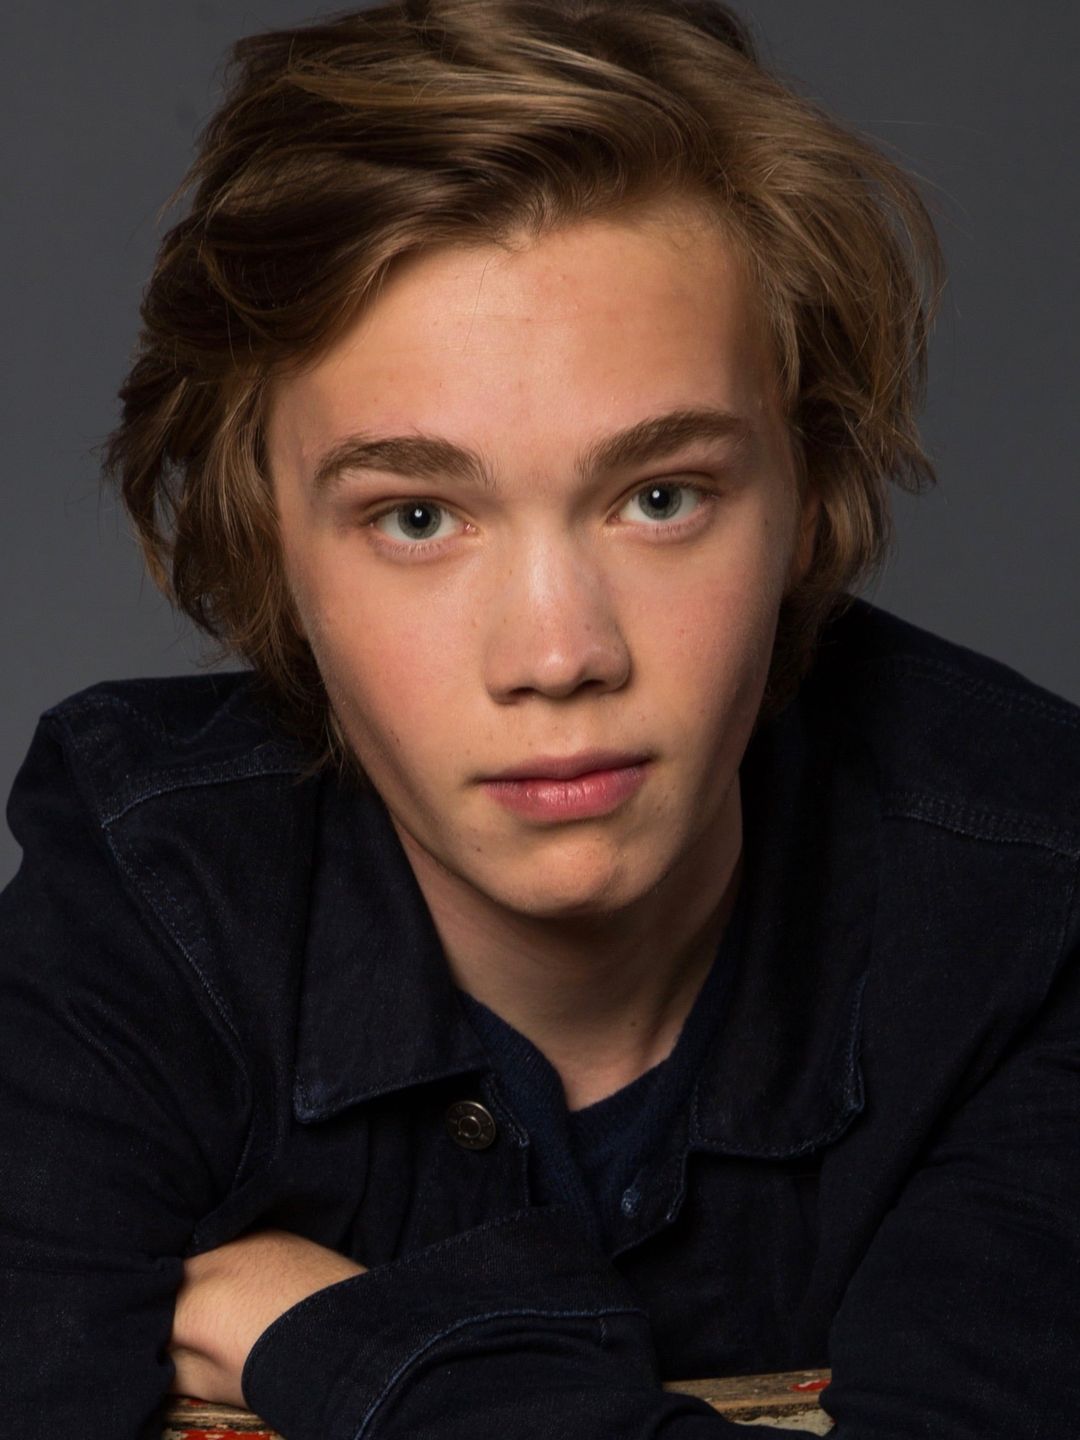 Charlie Plummer who is his father